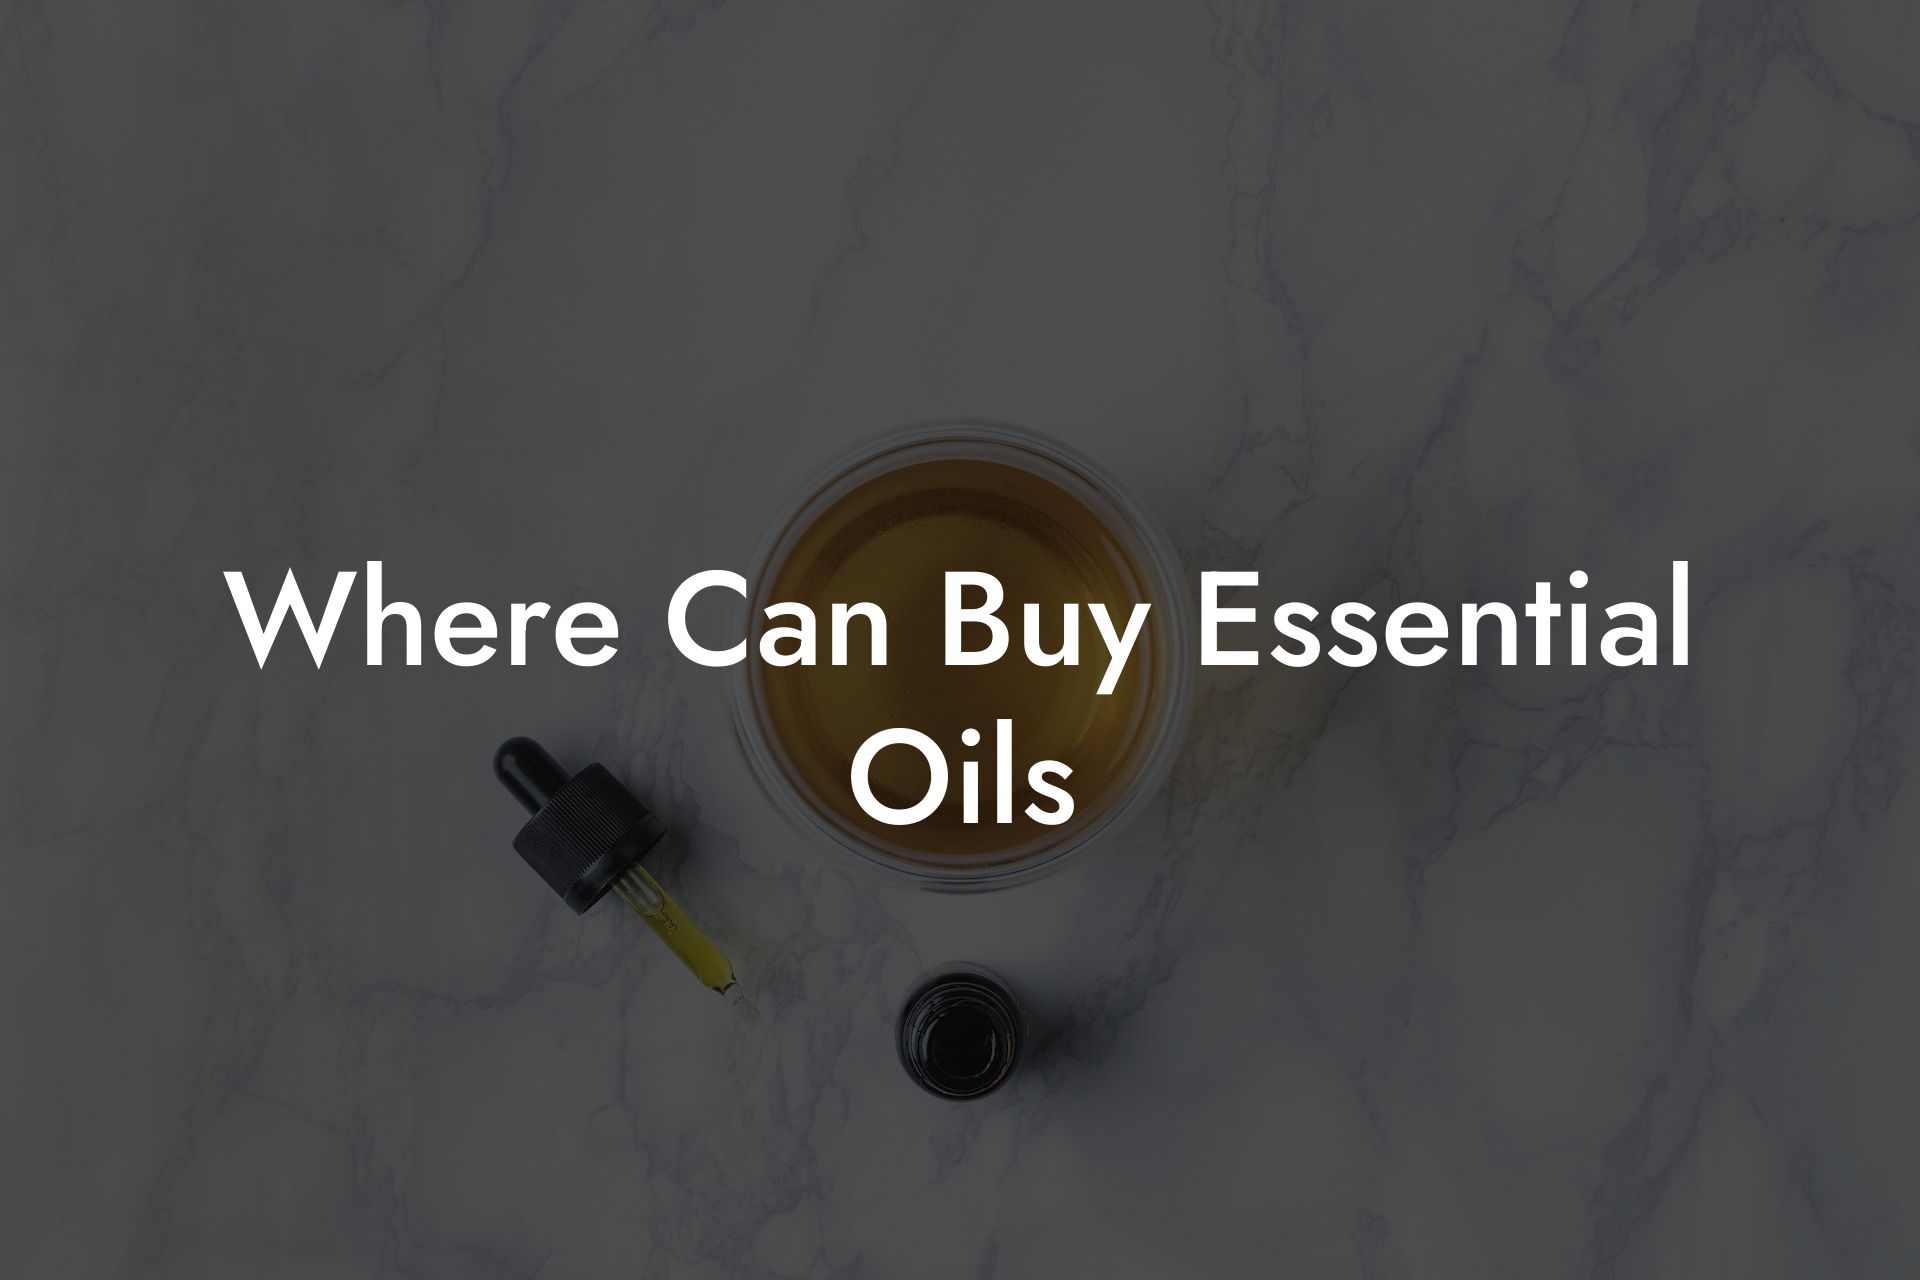 Where Can Buy Essential Oils